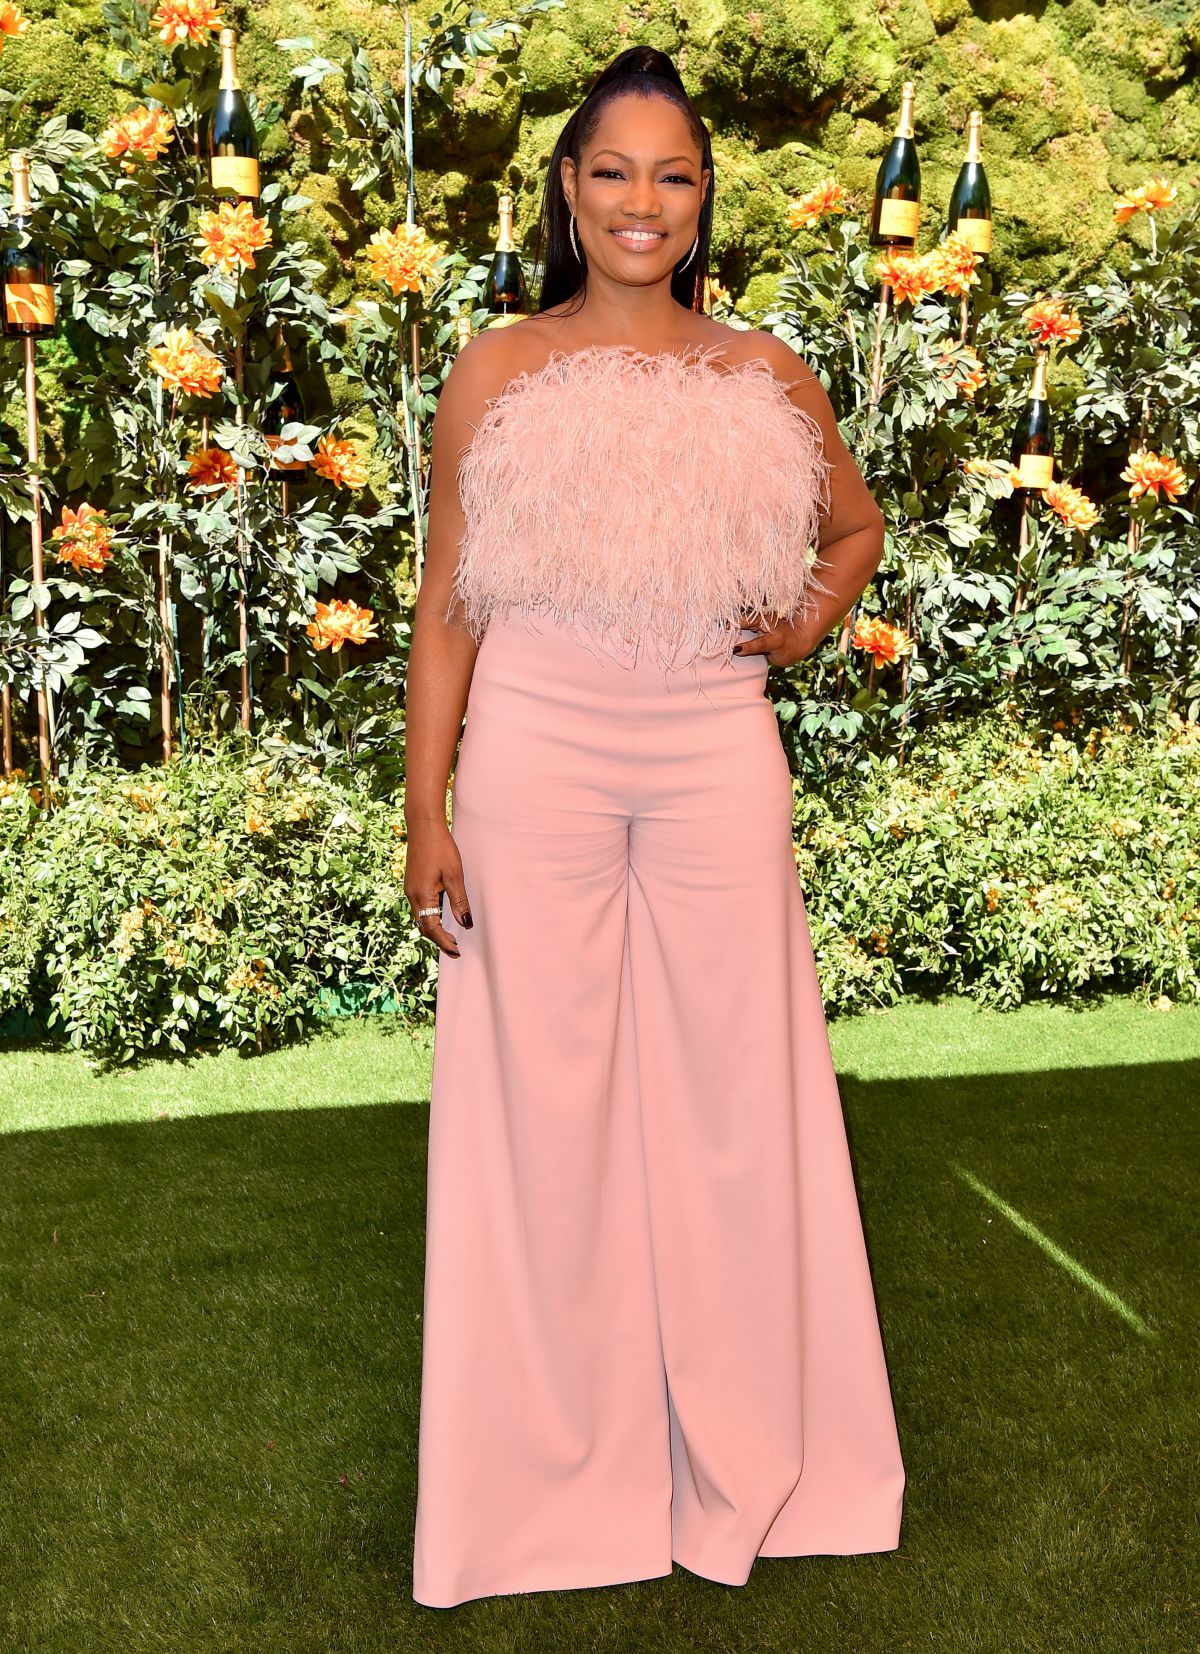 garcelle-beauvais-at-veuve-clicquot-polo-classic-at-will-rogers-state-park-in-los-angeles-10-05-2019-9.jpg